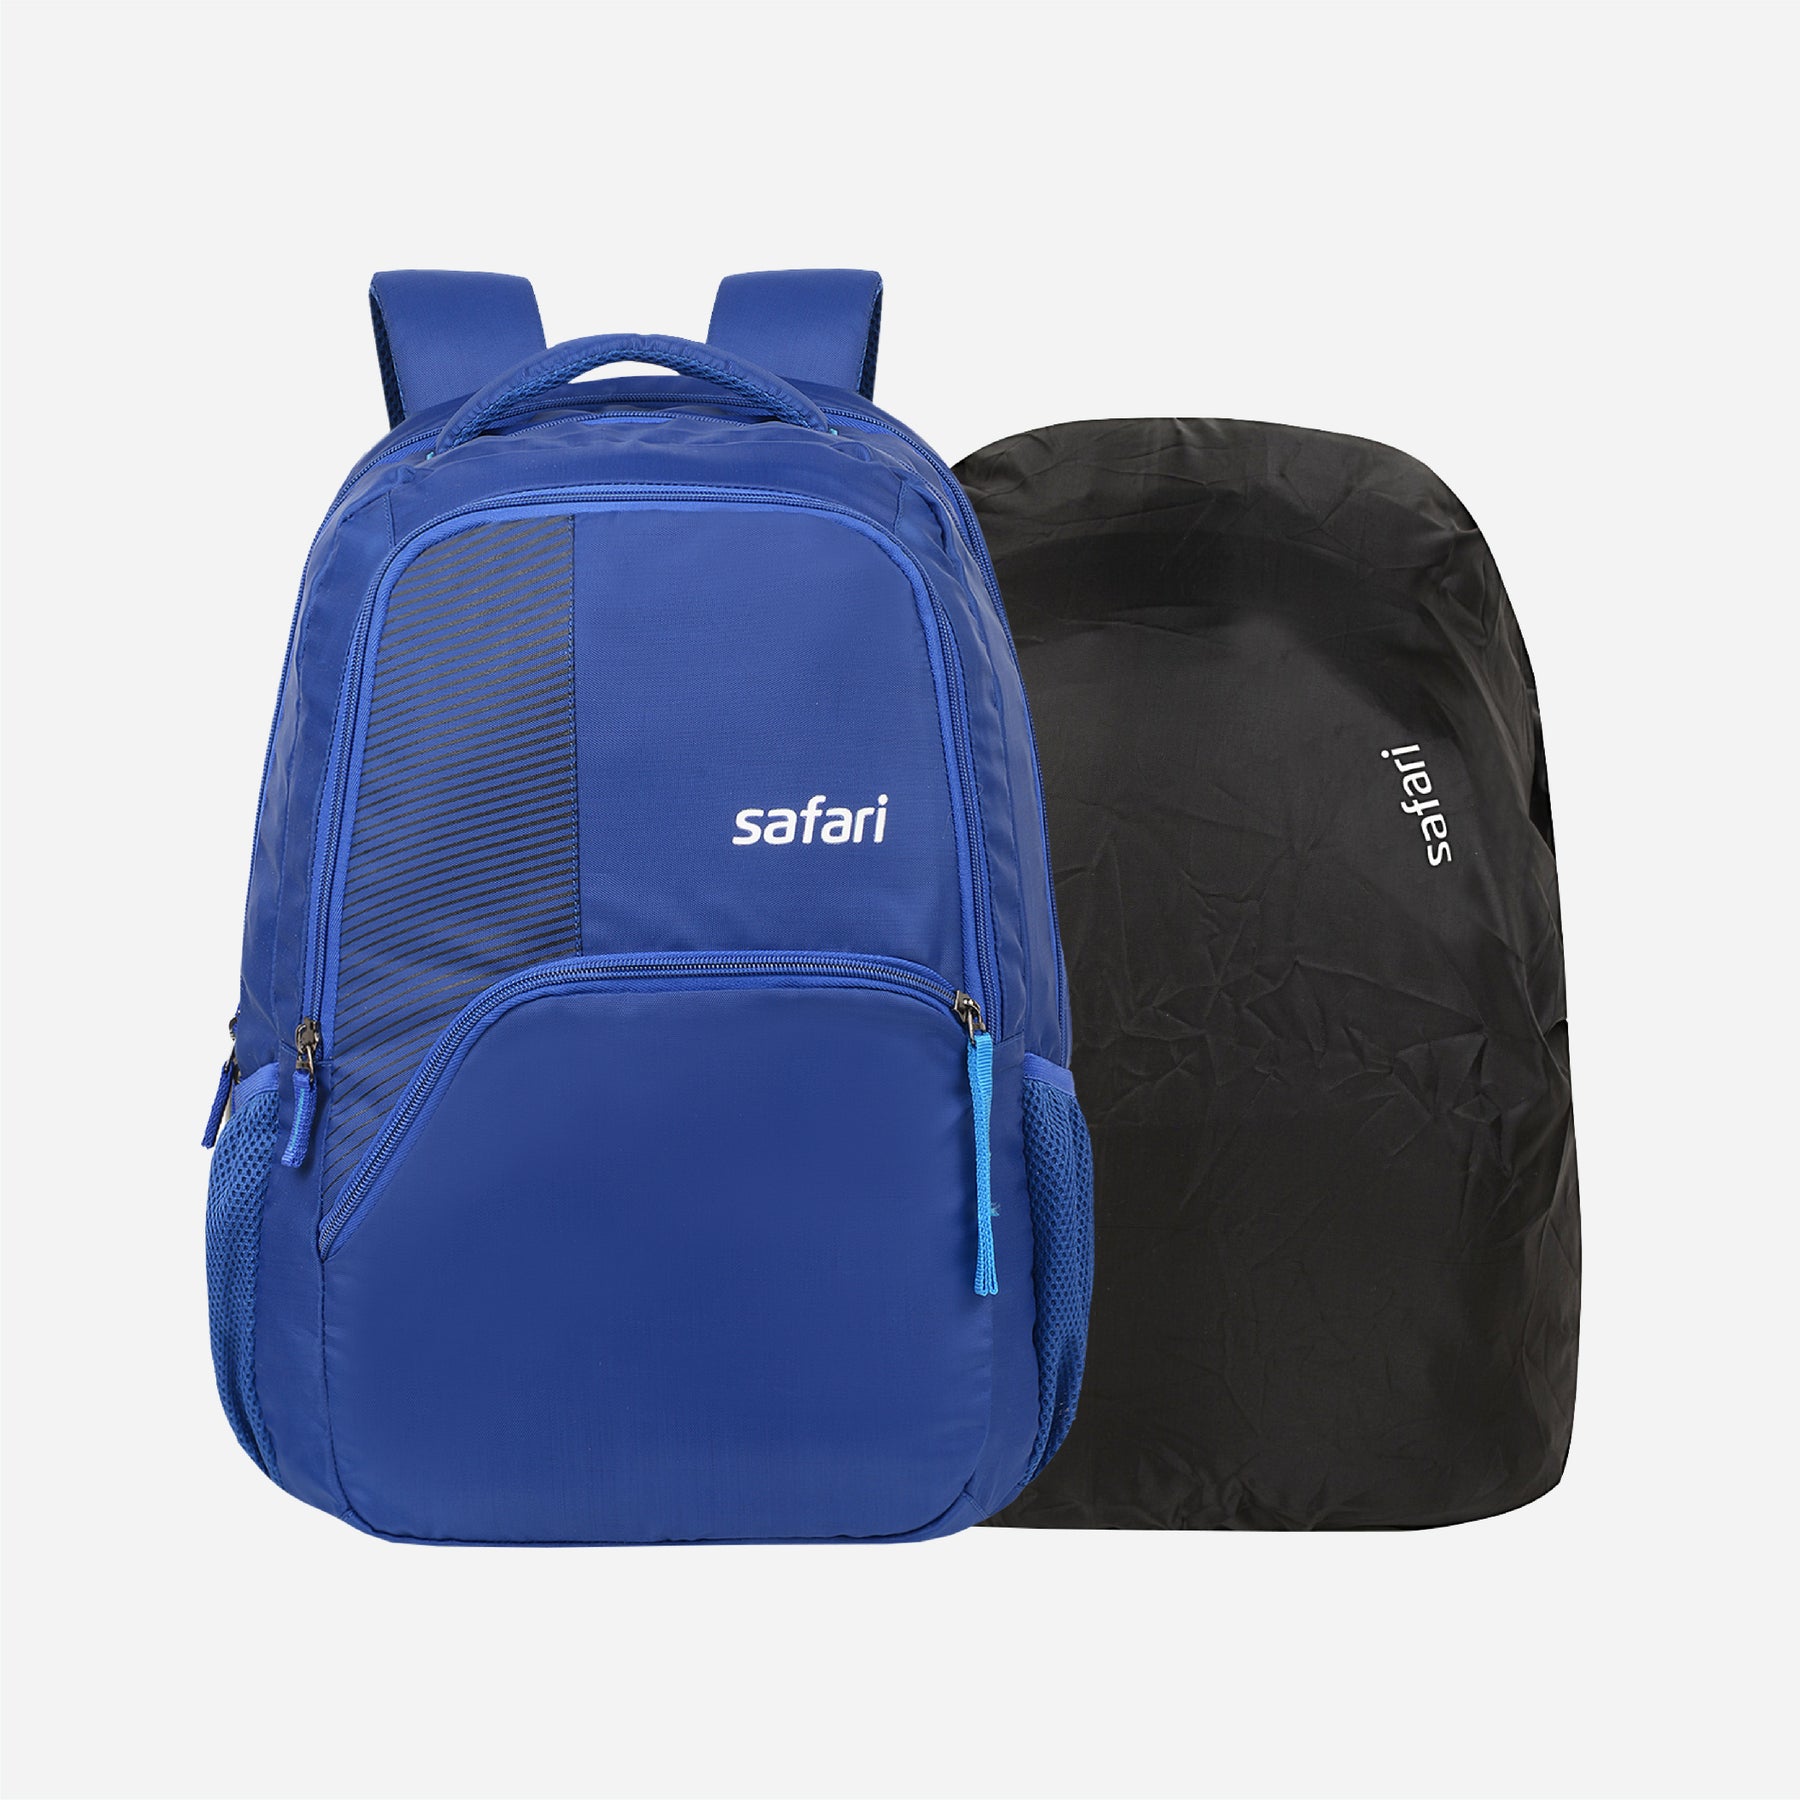 Helix Laptop Backpack with Raincover - Blue